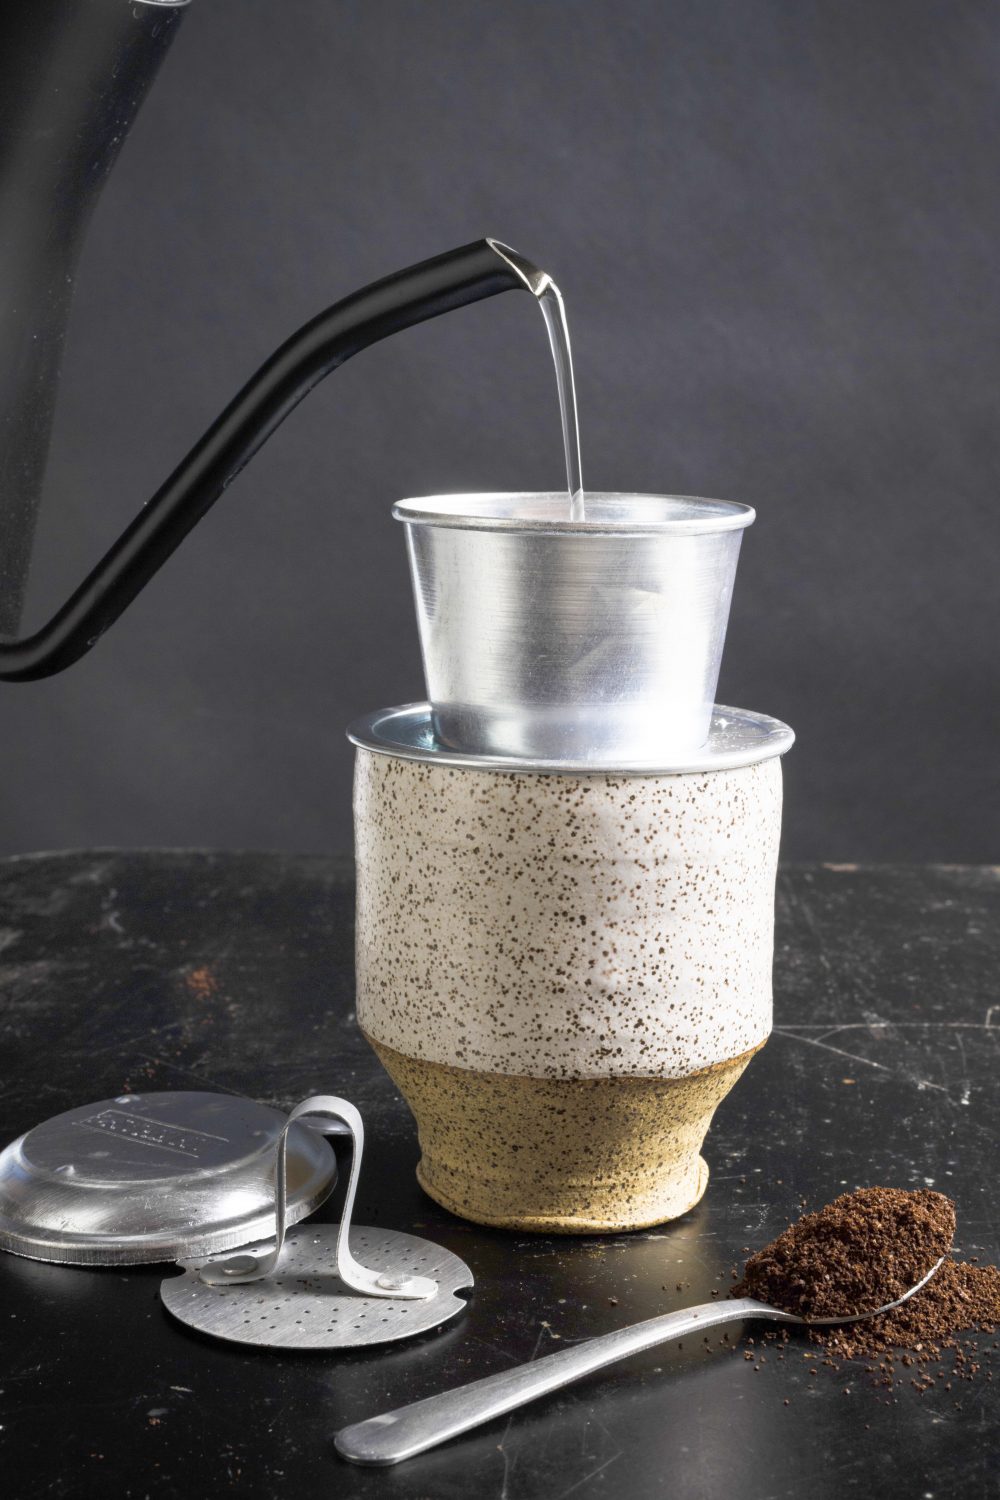 This drip-style device makes pour-overs a snap.